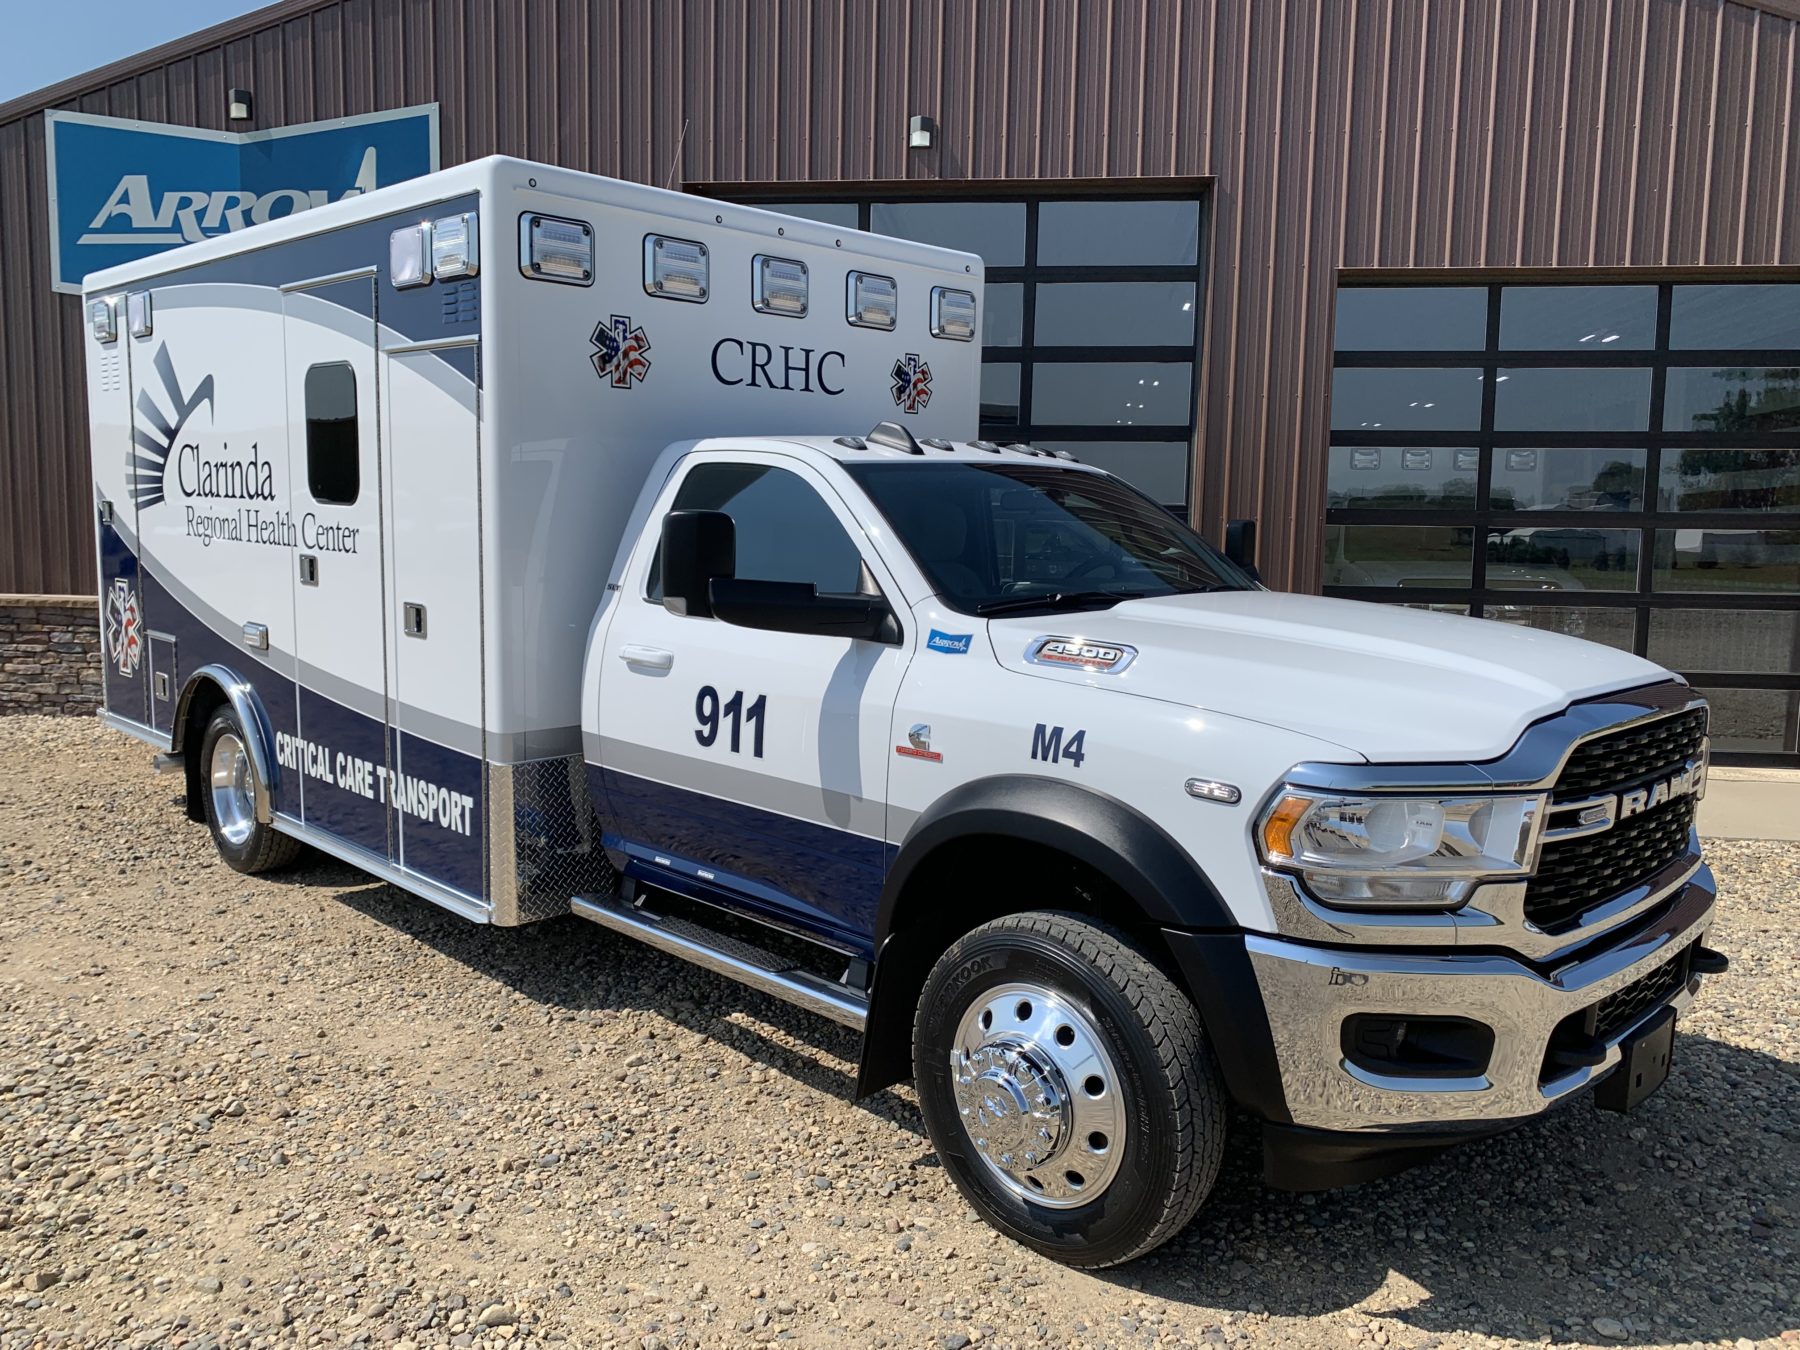 2022 Ram 4500 4x4 Heavy Duty Ambulance For Sale – Picture 5